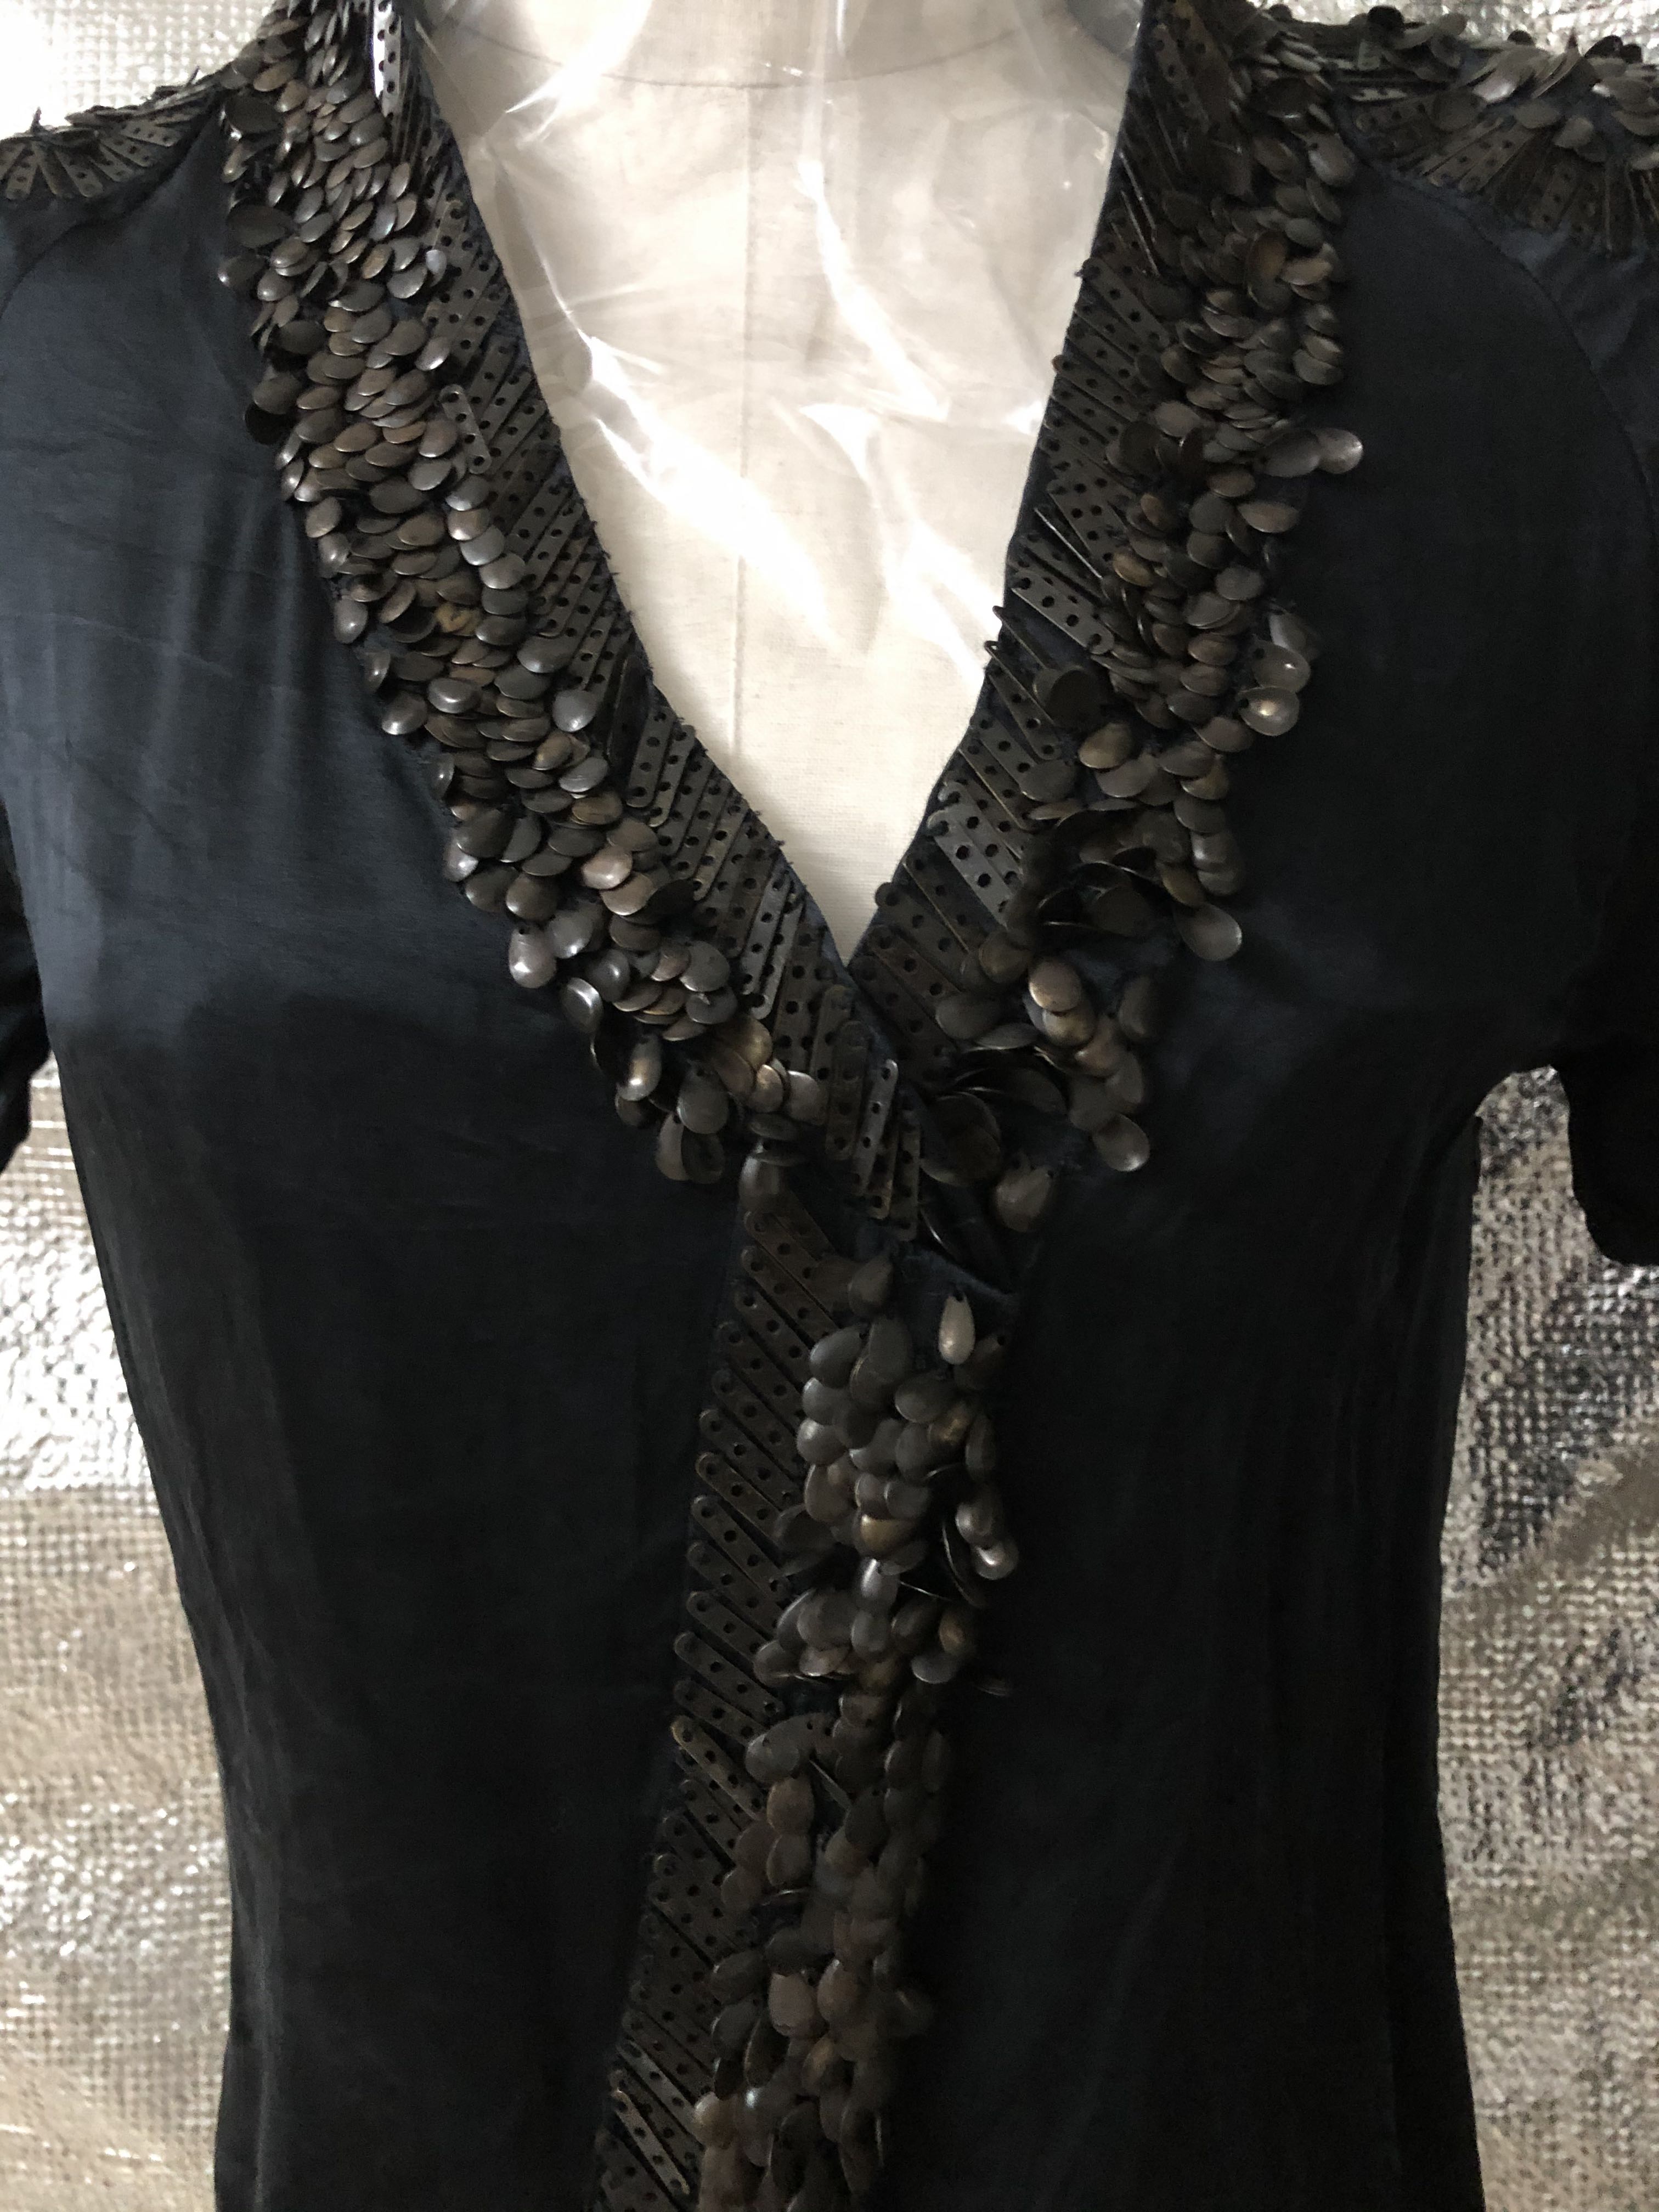 Armani black silk top with heavy sequins on shoulder and packets (97% new)